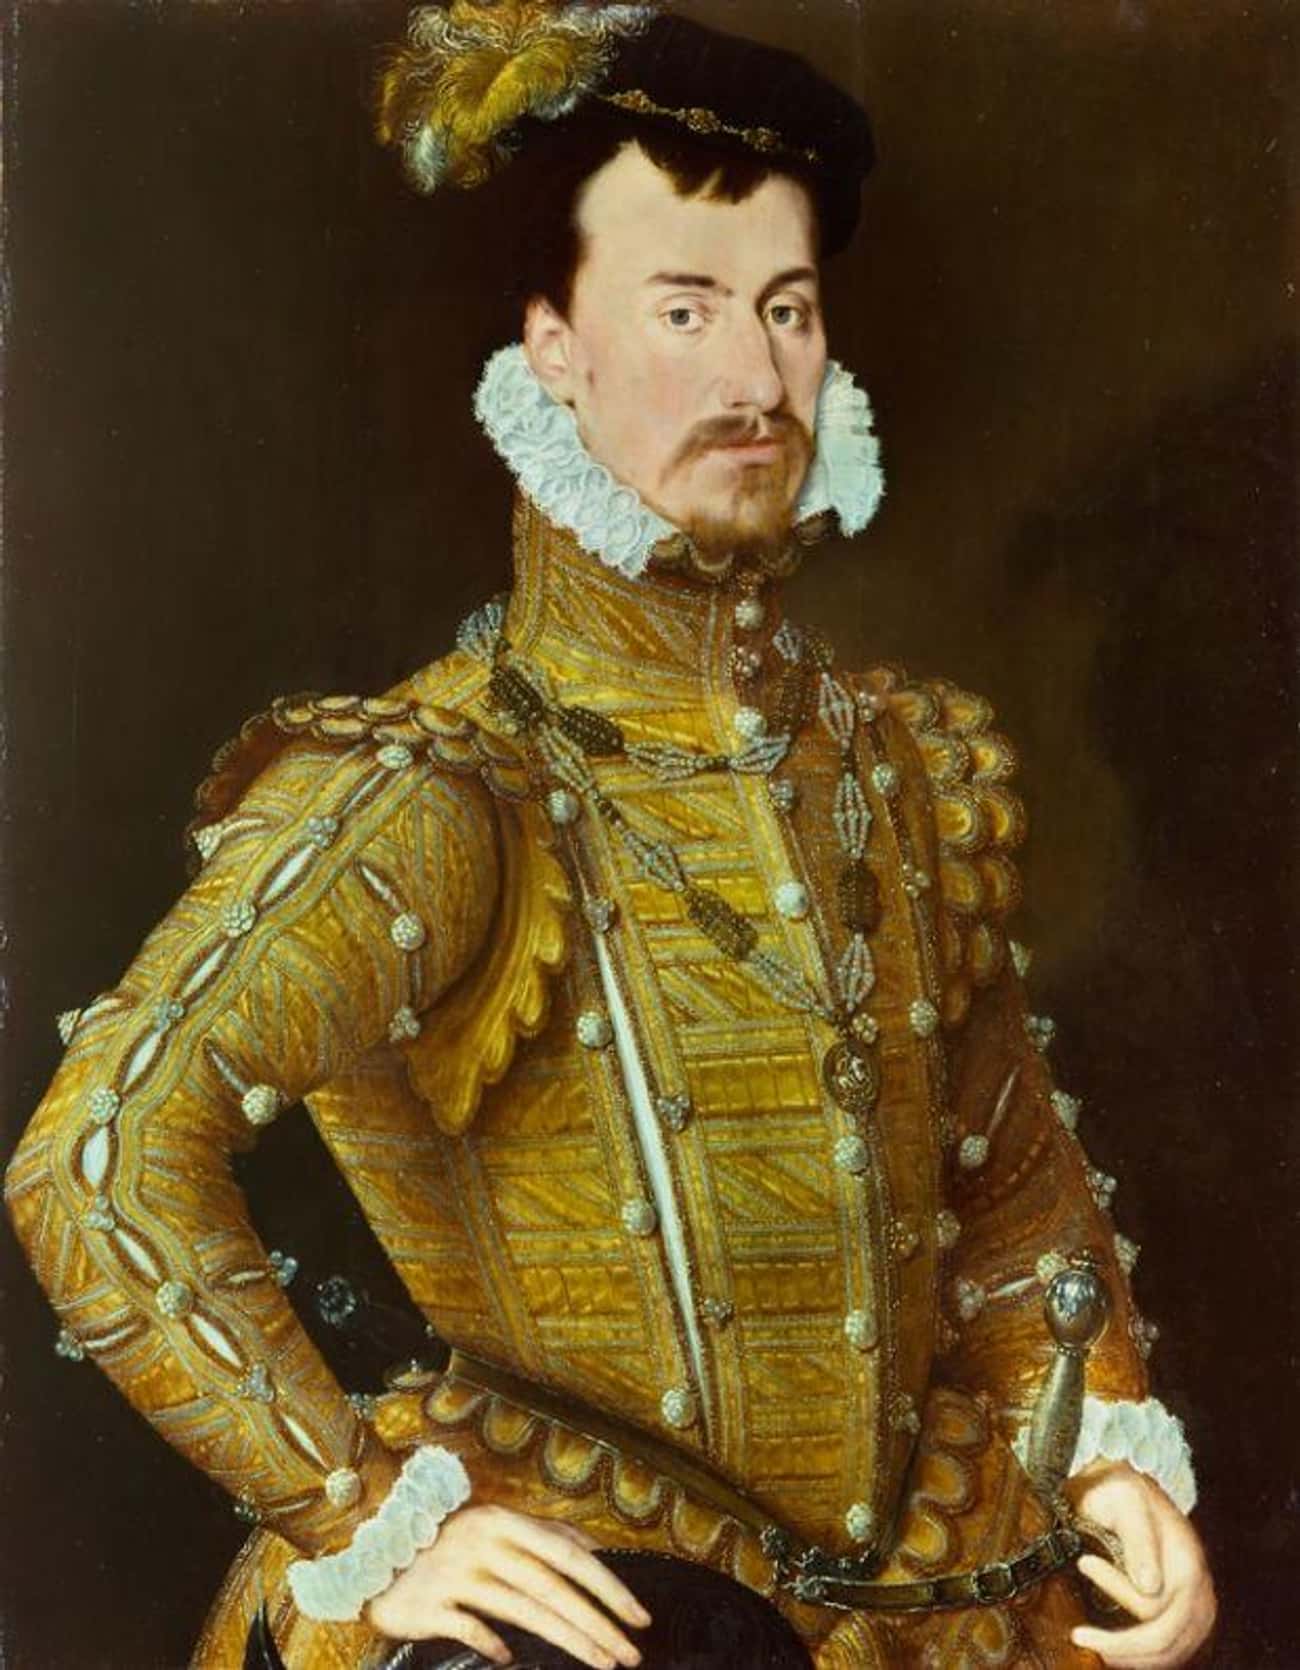 She Had A Longtime 'Friendship' With Robert Dudley That May Have Produced A Love Child